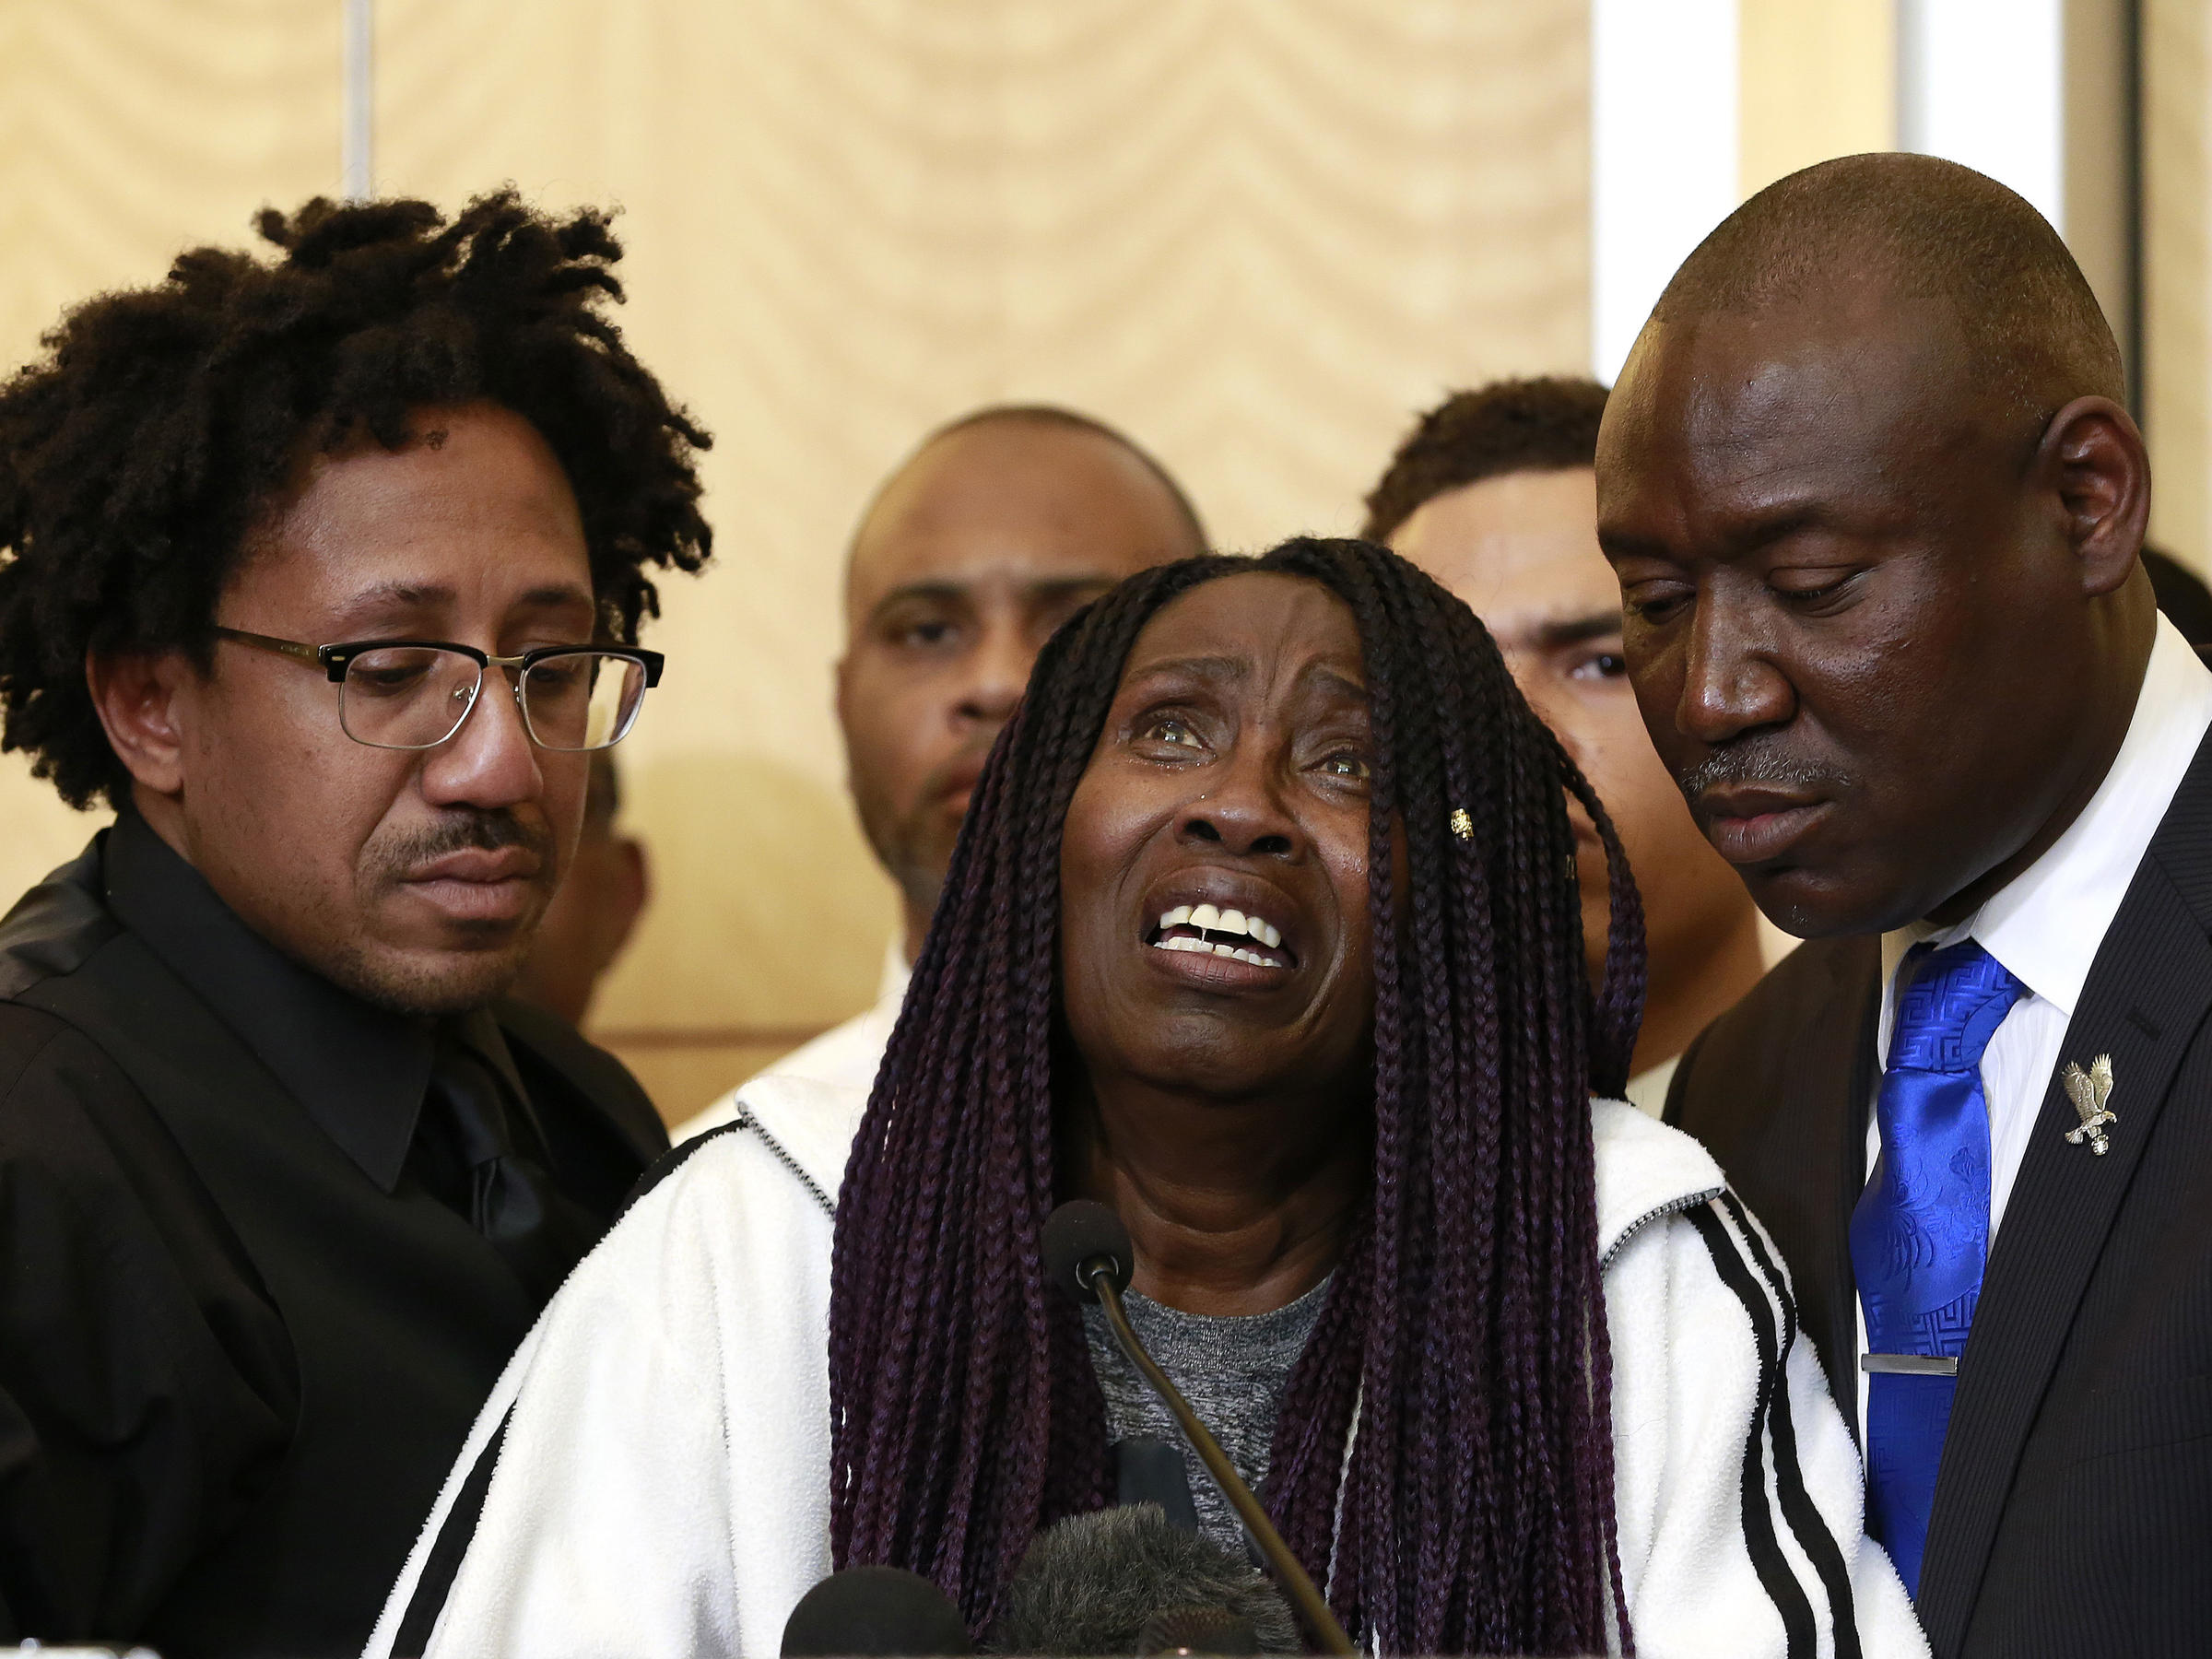 Sequita Thompson pleads for the officers who killed her grandson, Stephon Clark, to face criminal charges. Clark's uncle Kurtis Gordon stands on the left and Attorney Ben Crump on the right.